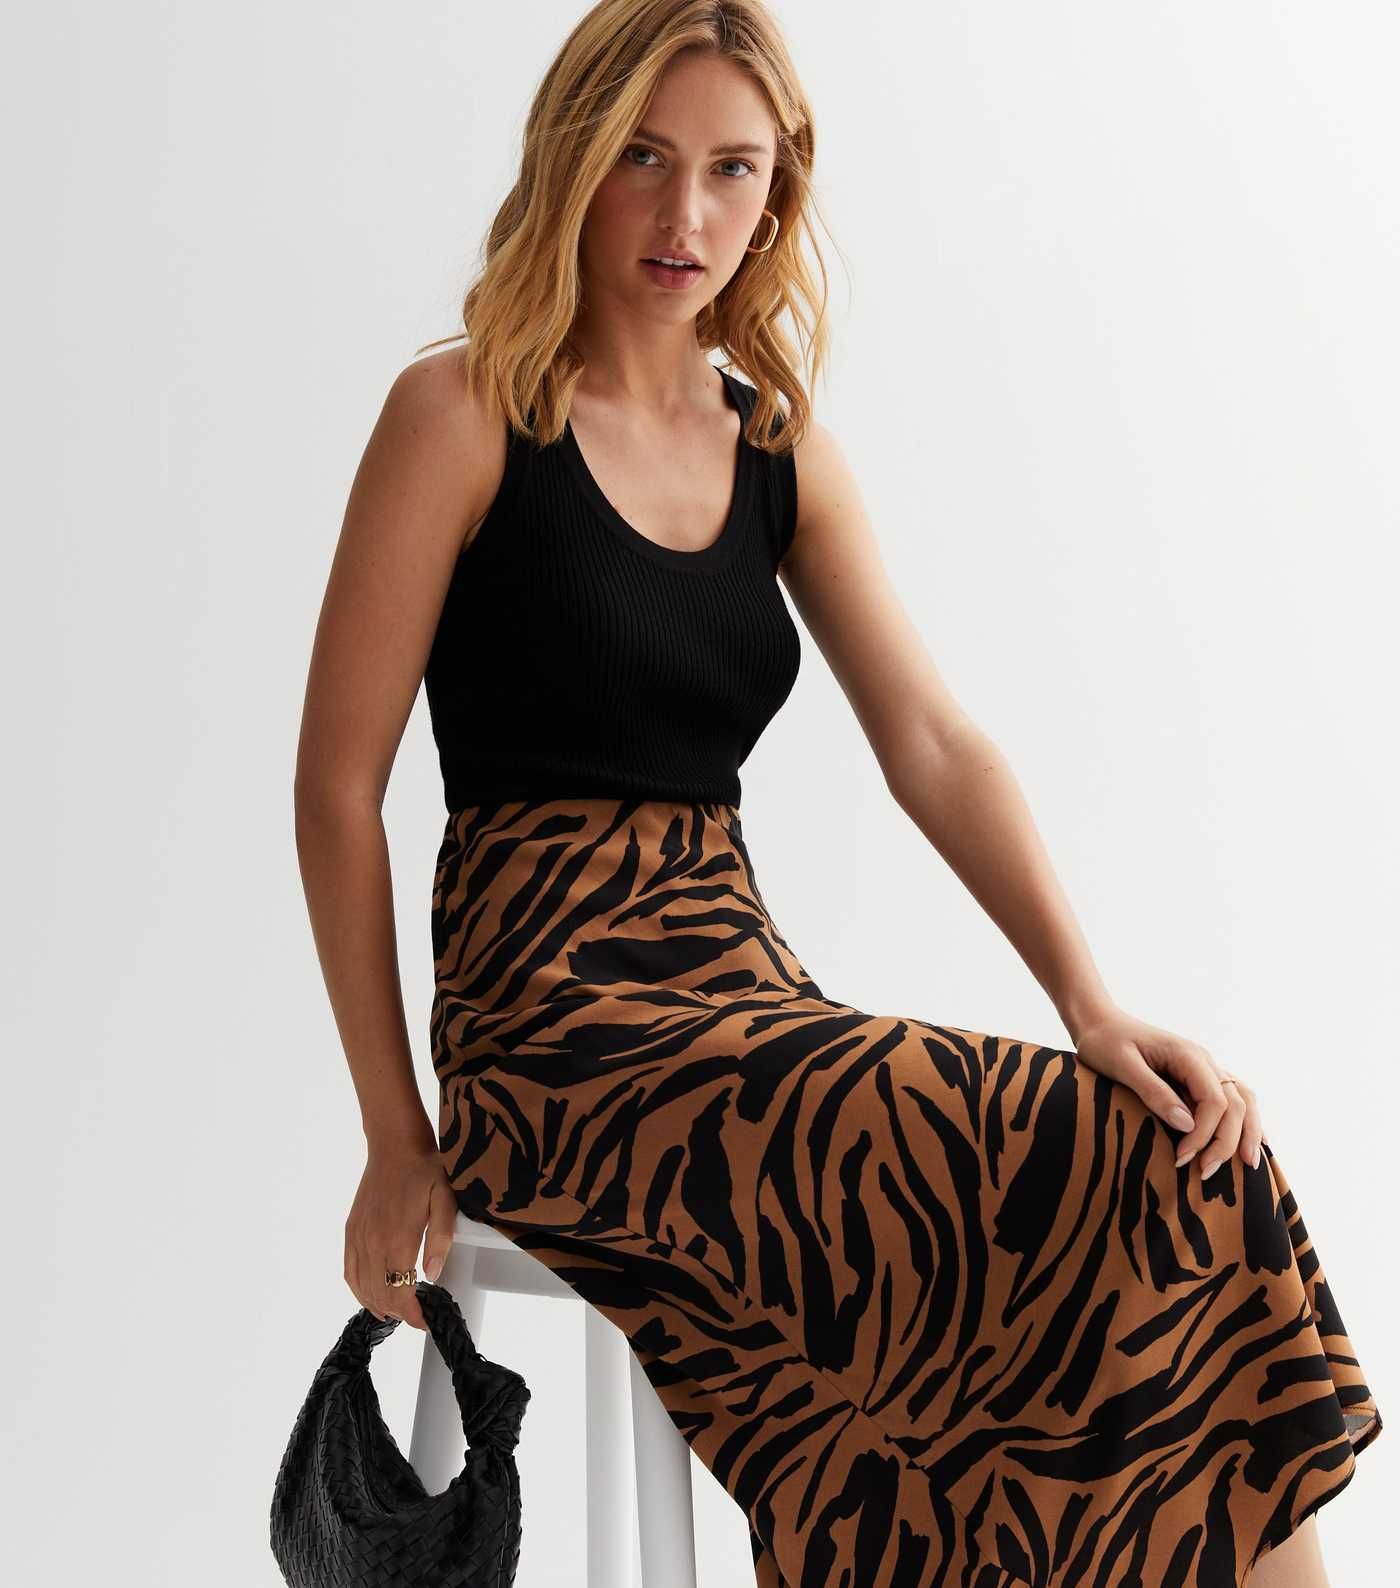 Brown Animal Print Midi Skirt
						
						Add to Saved Items
						Remove from Saved Items | New Look (UK)